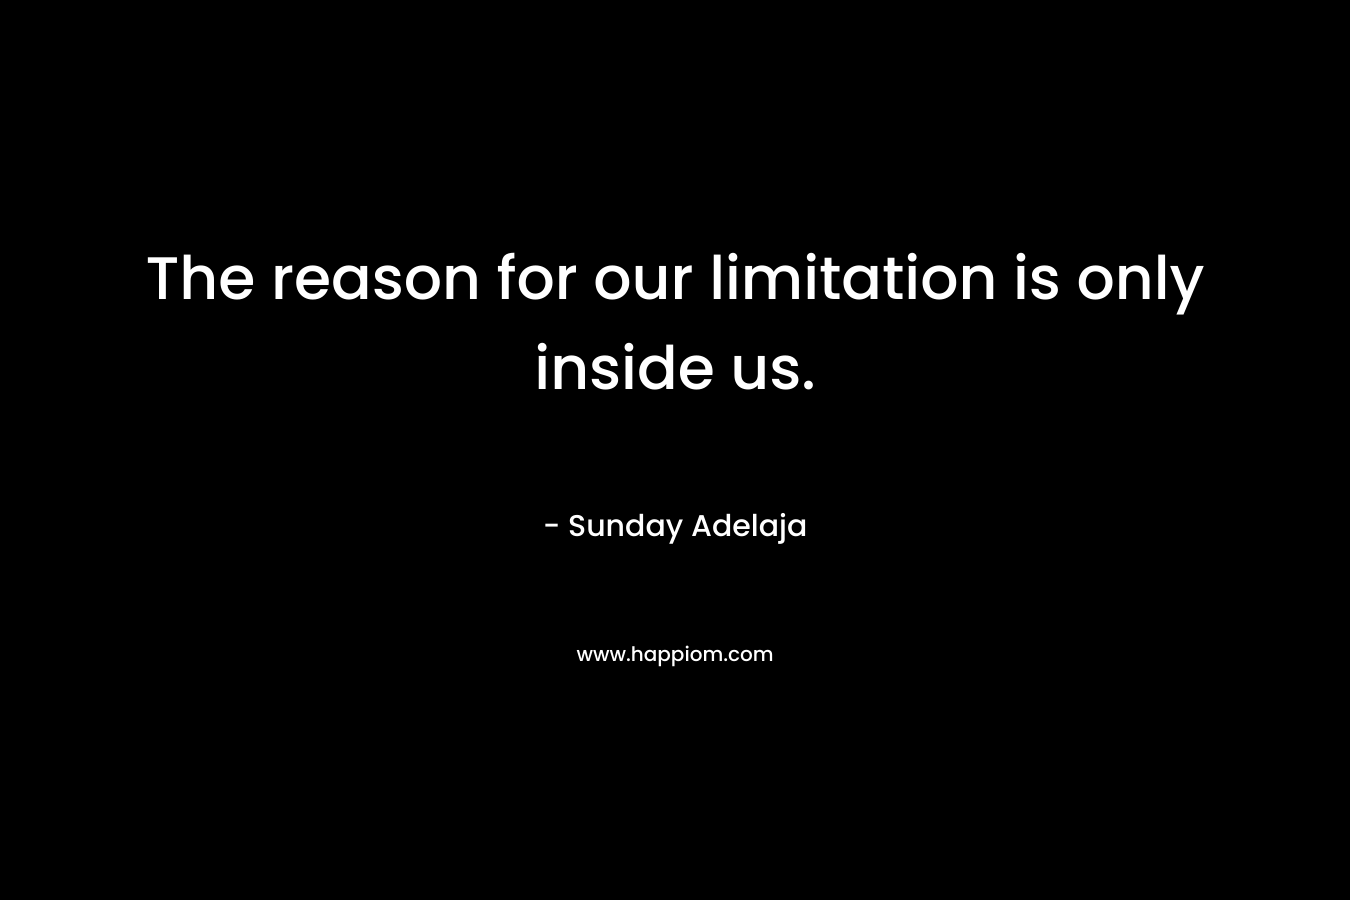 The reason for our limitation is only inside us.